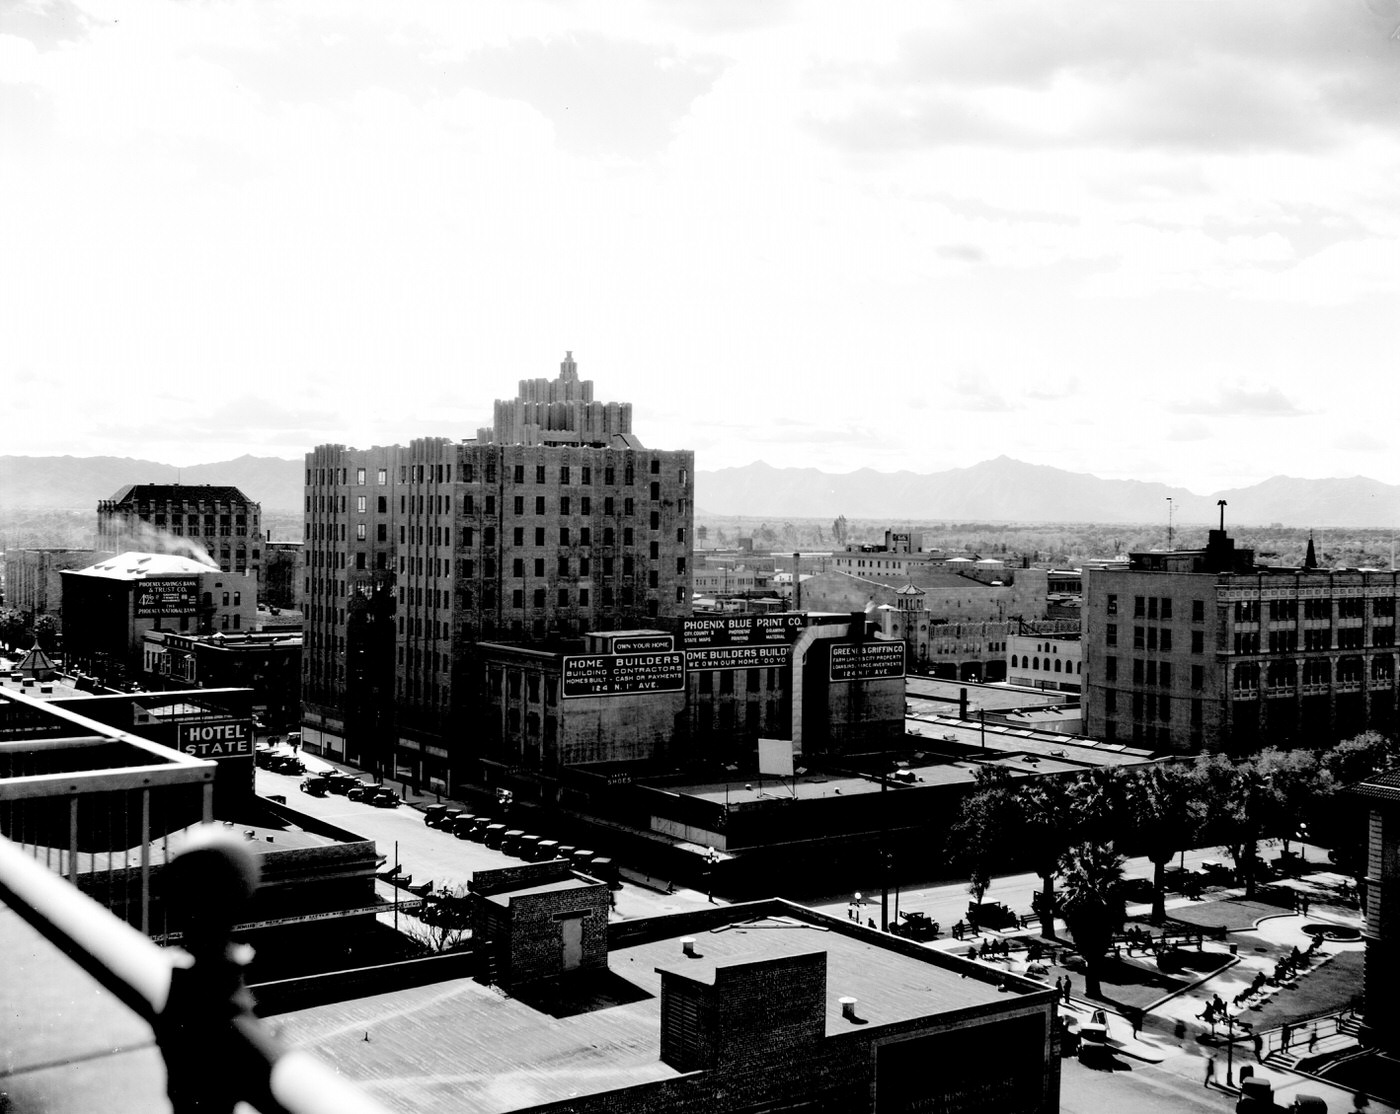 View of Phoenix From the Security Building, 1930s